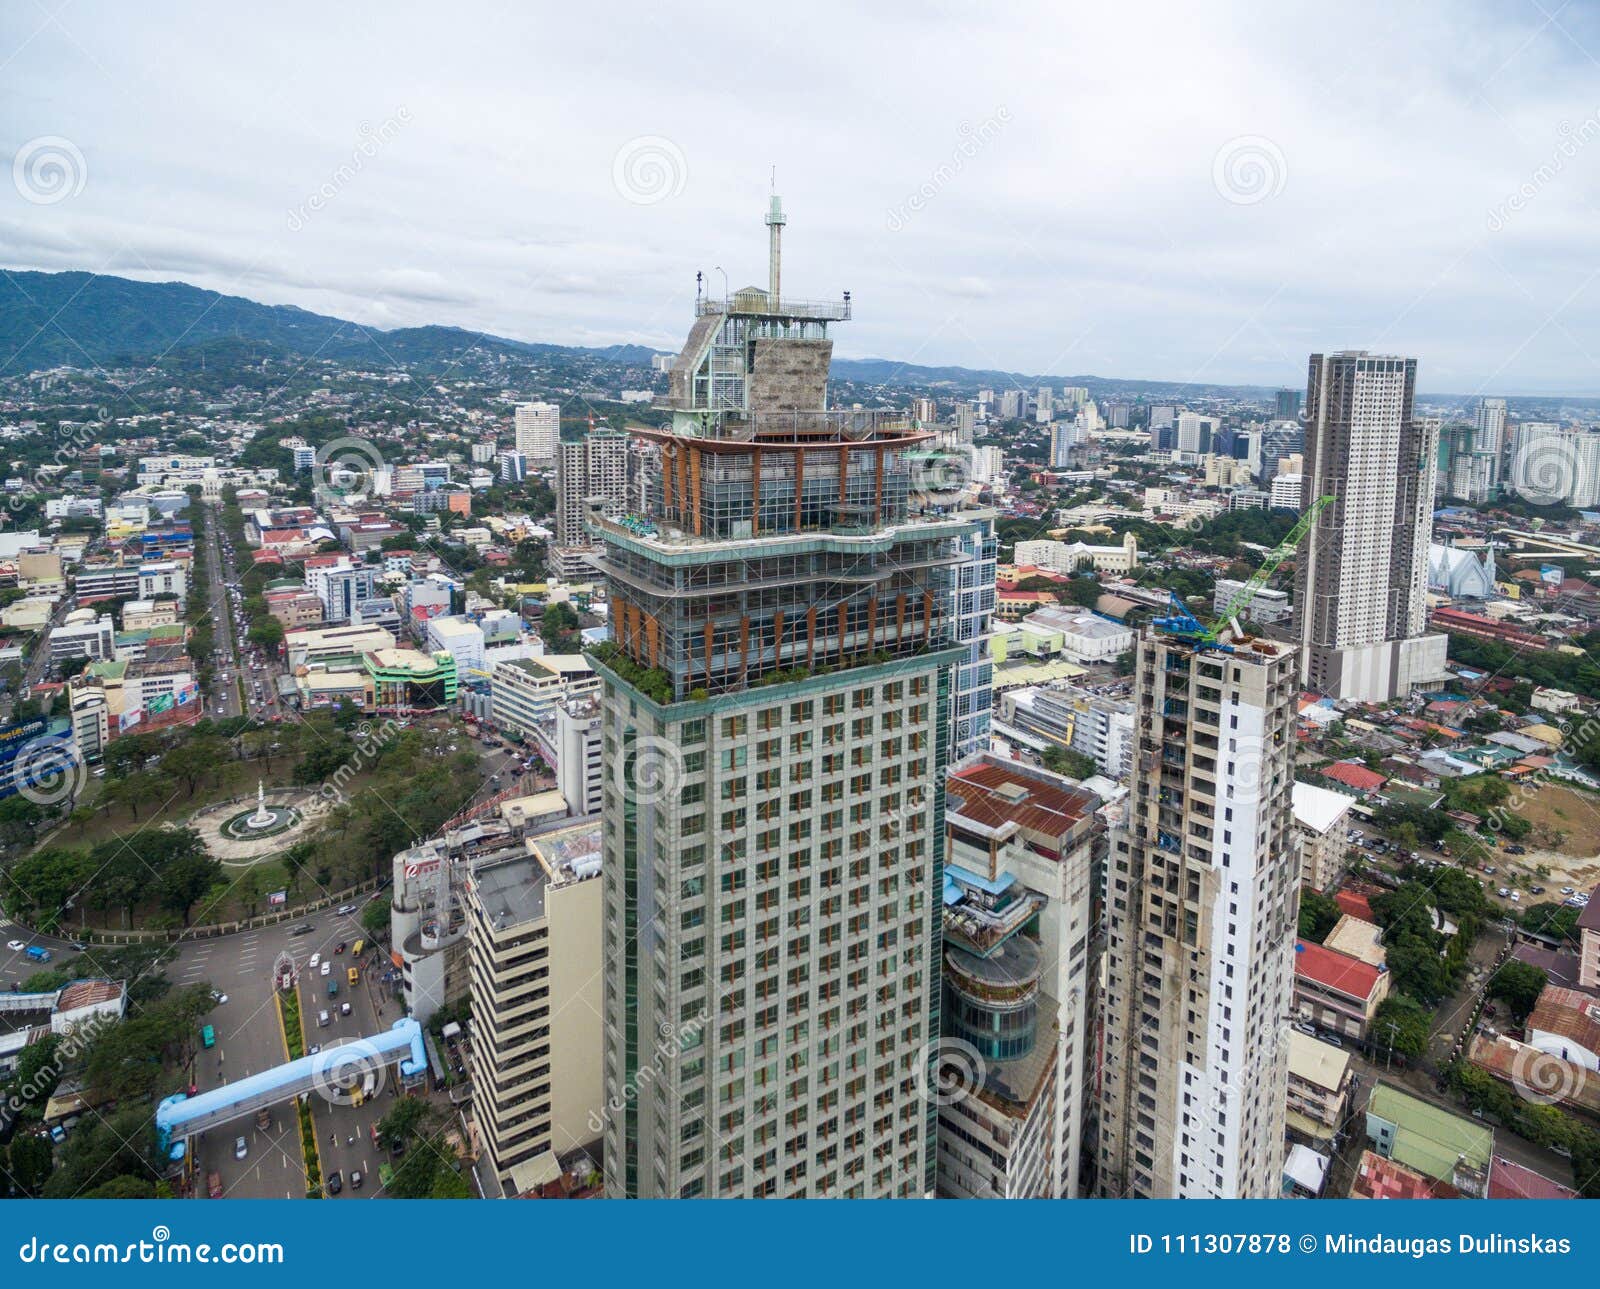 cebu city cityscape with skyscraper and local architecture. province of the philippines located in the central visayas